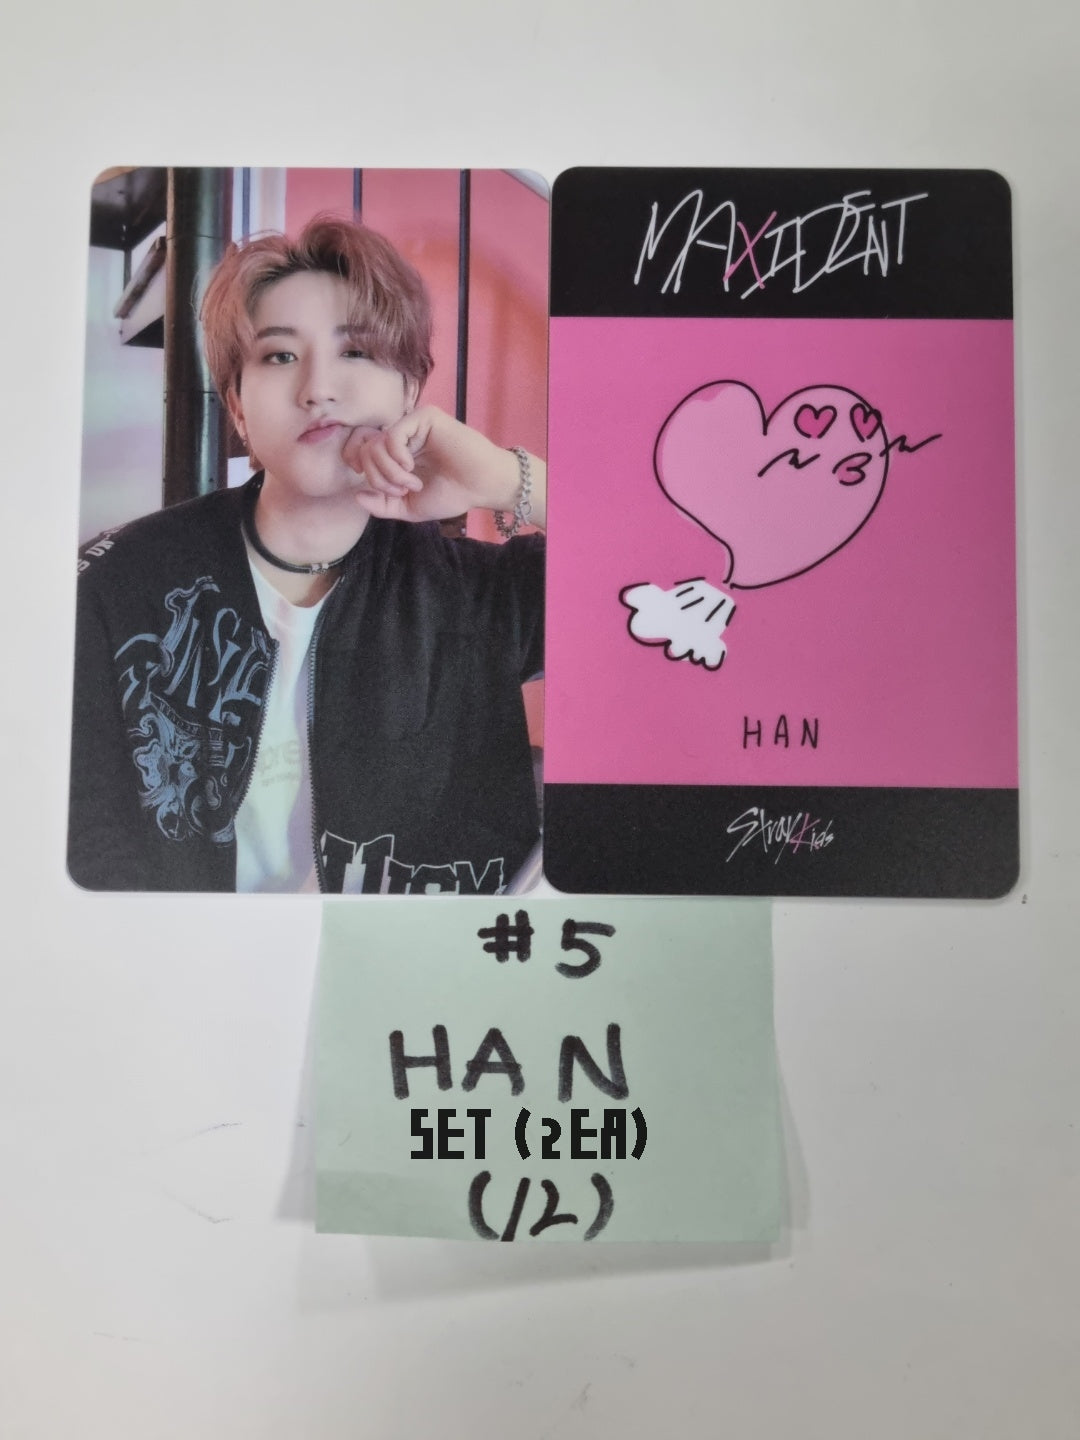 Stray Kids Maniac Seoul Special Event - “MAXIDENT” Pre-order PVC Lucky Draw Photocards Set (2EA) - Must Read!